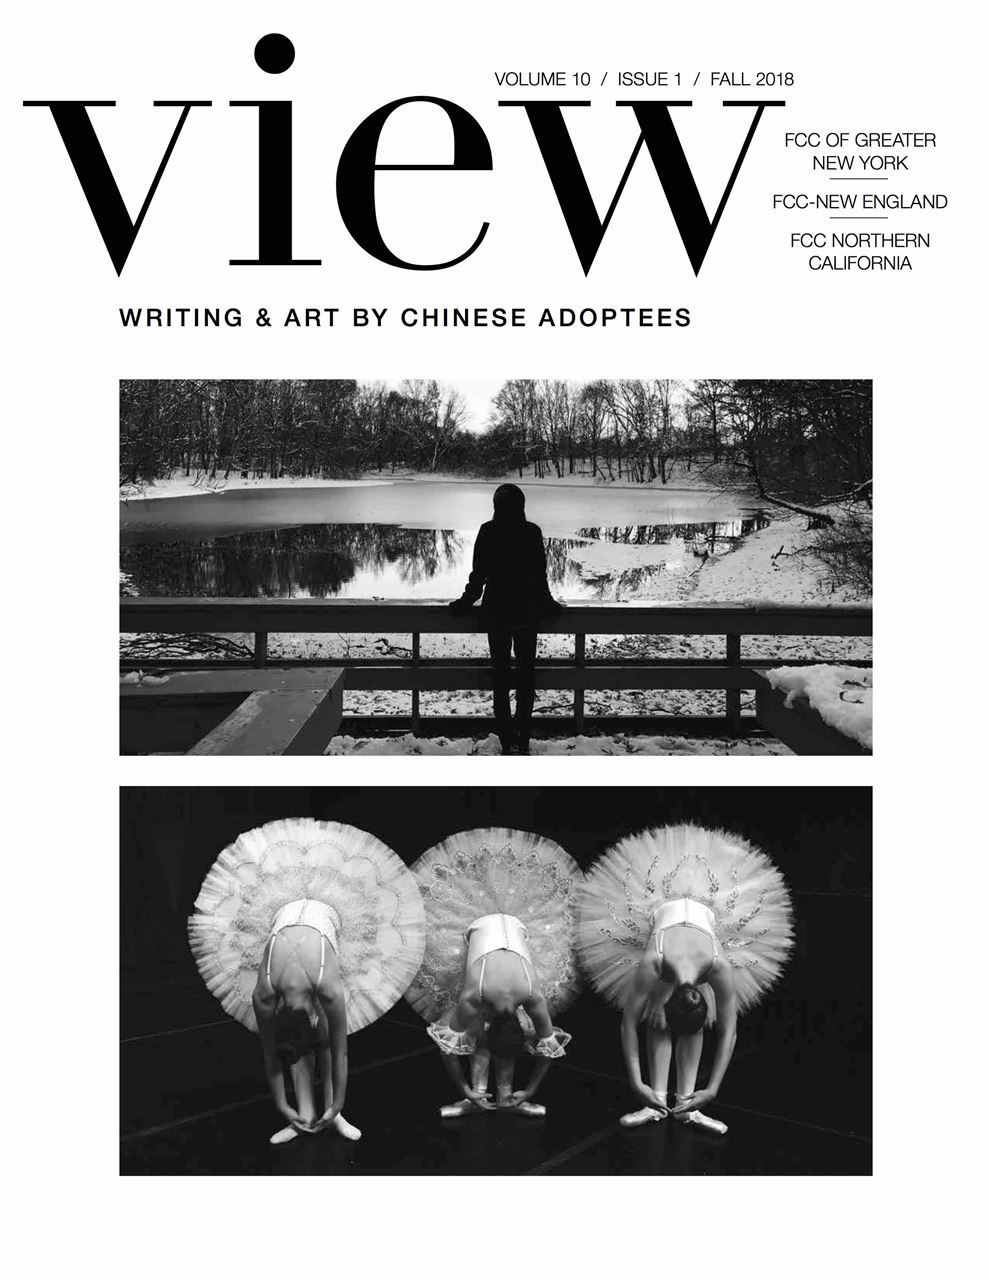 View 2018 cover